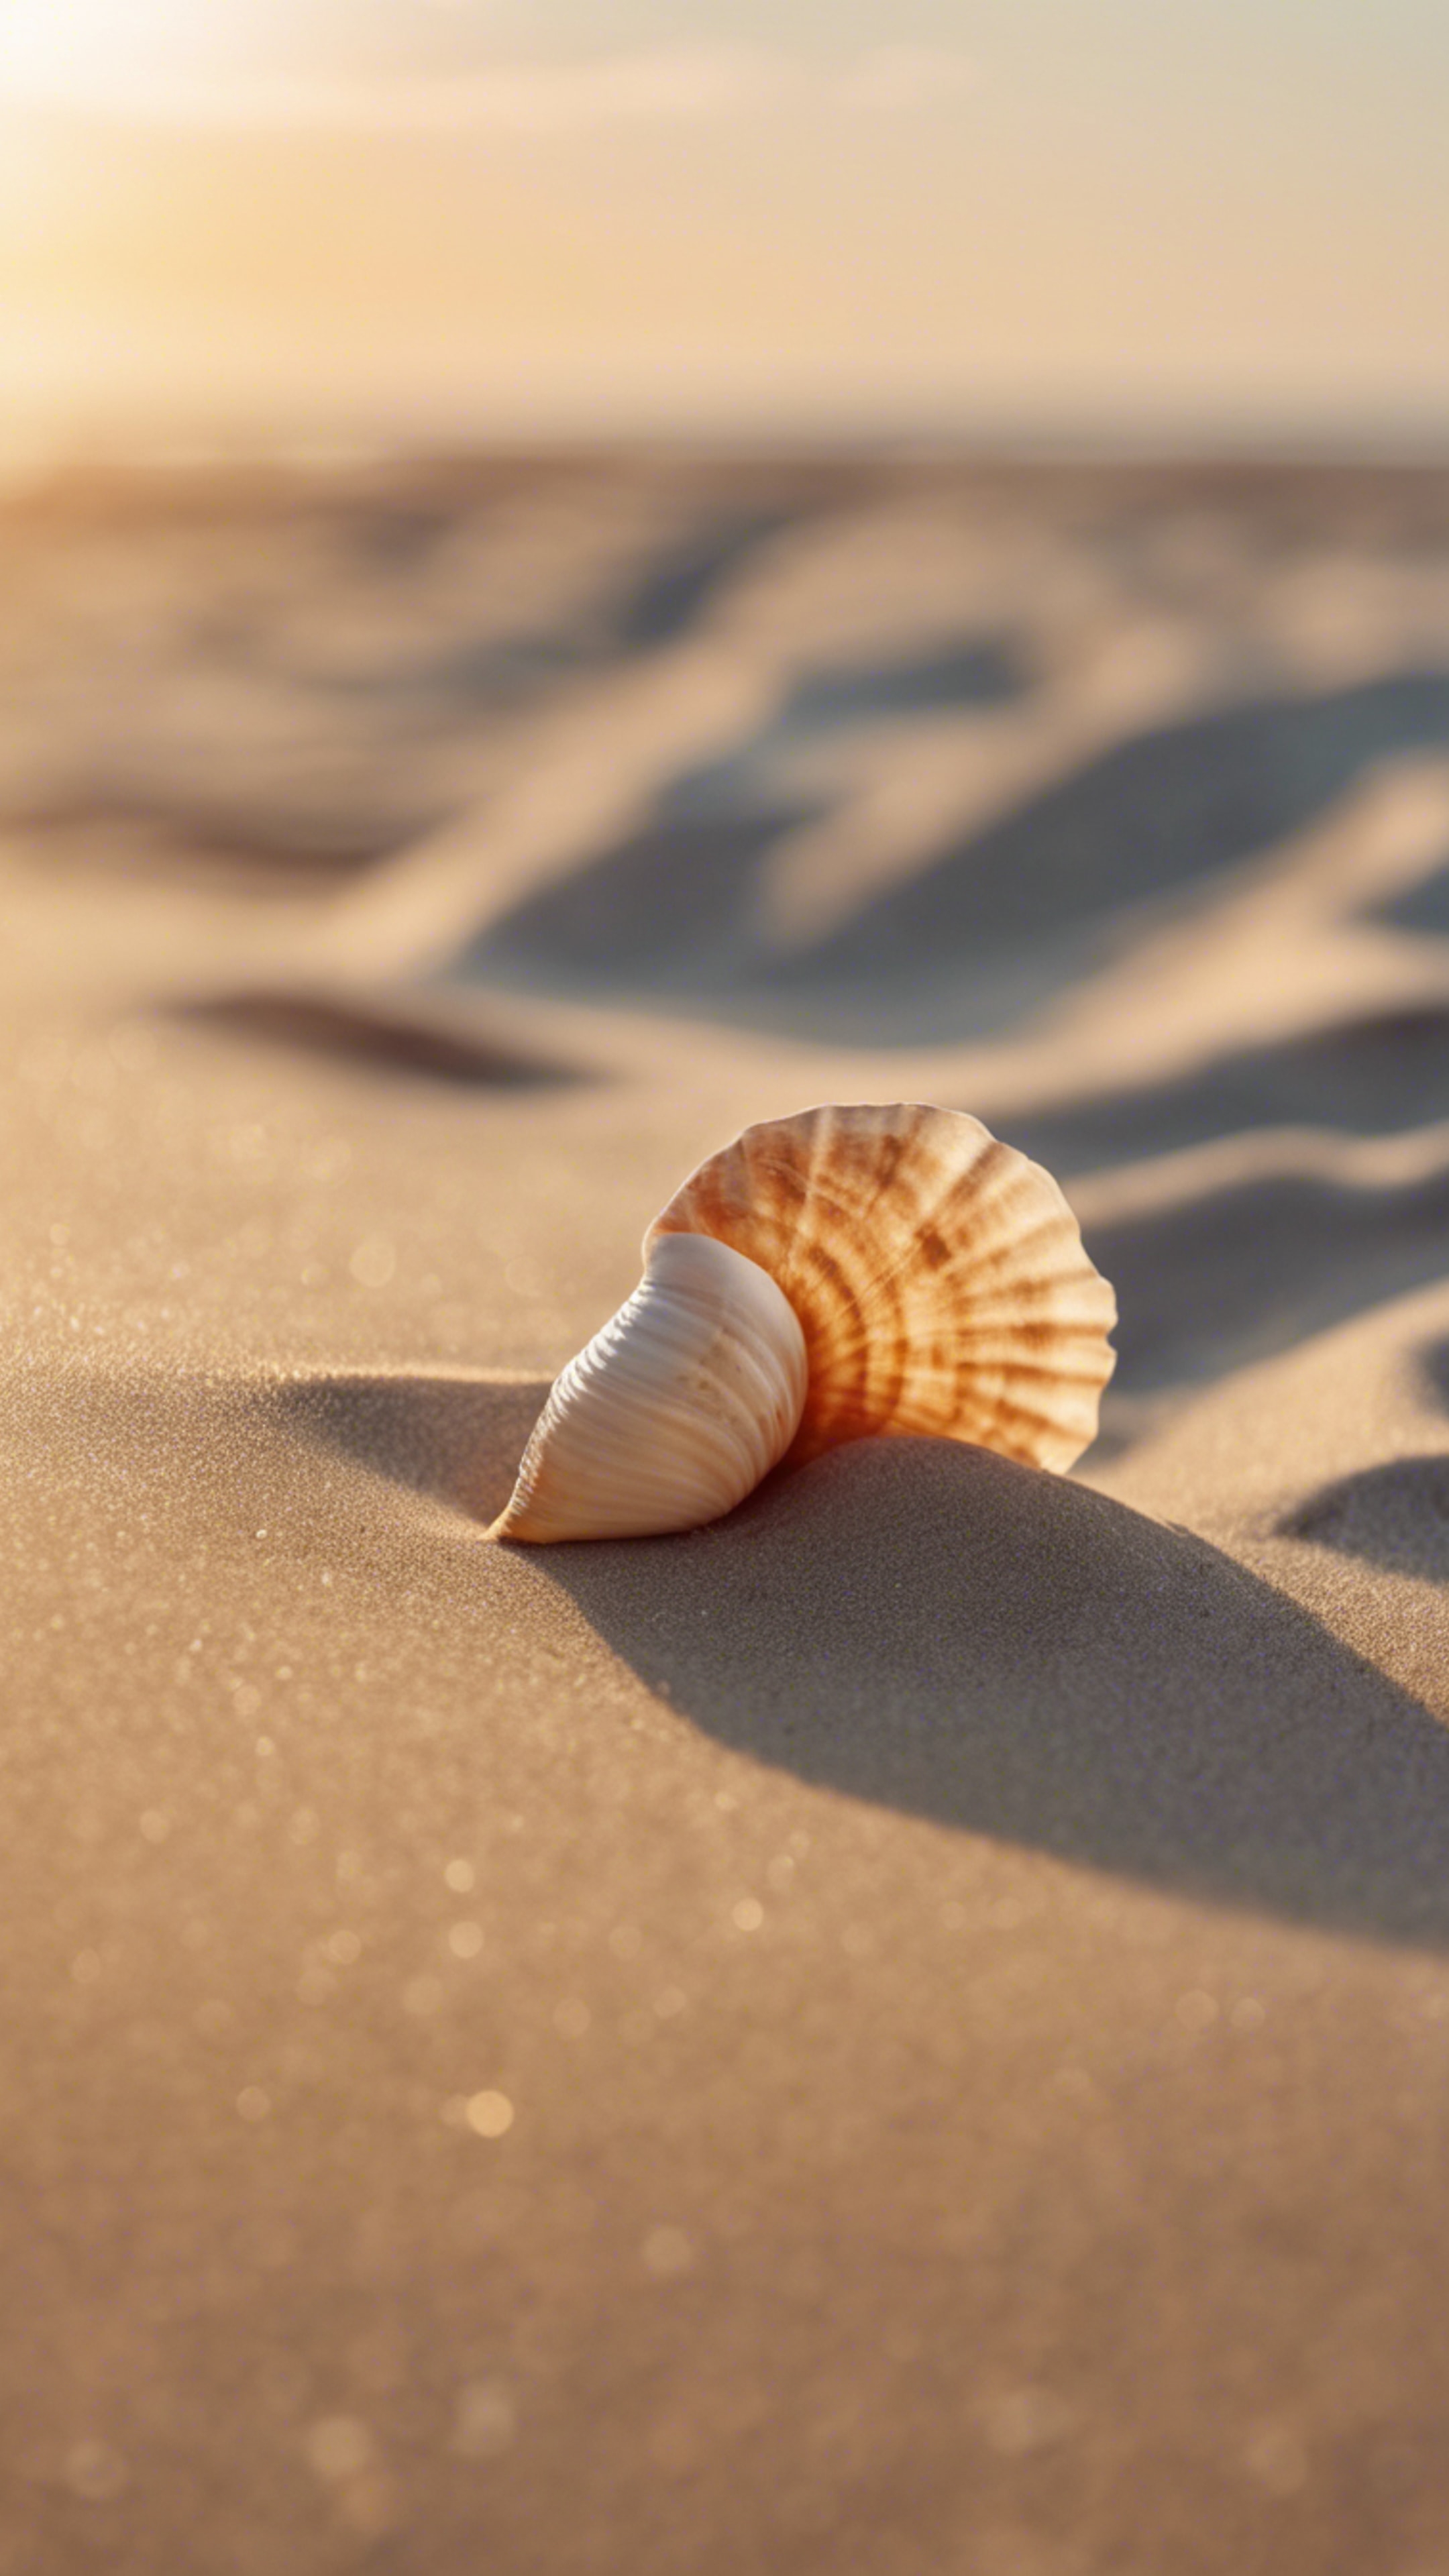 A sandy beach at sunrise, with a lonely seashell on the smooth, cool beige sand. 벽지[f397365f3b8642f18a02]